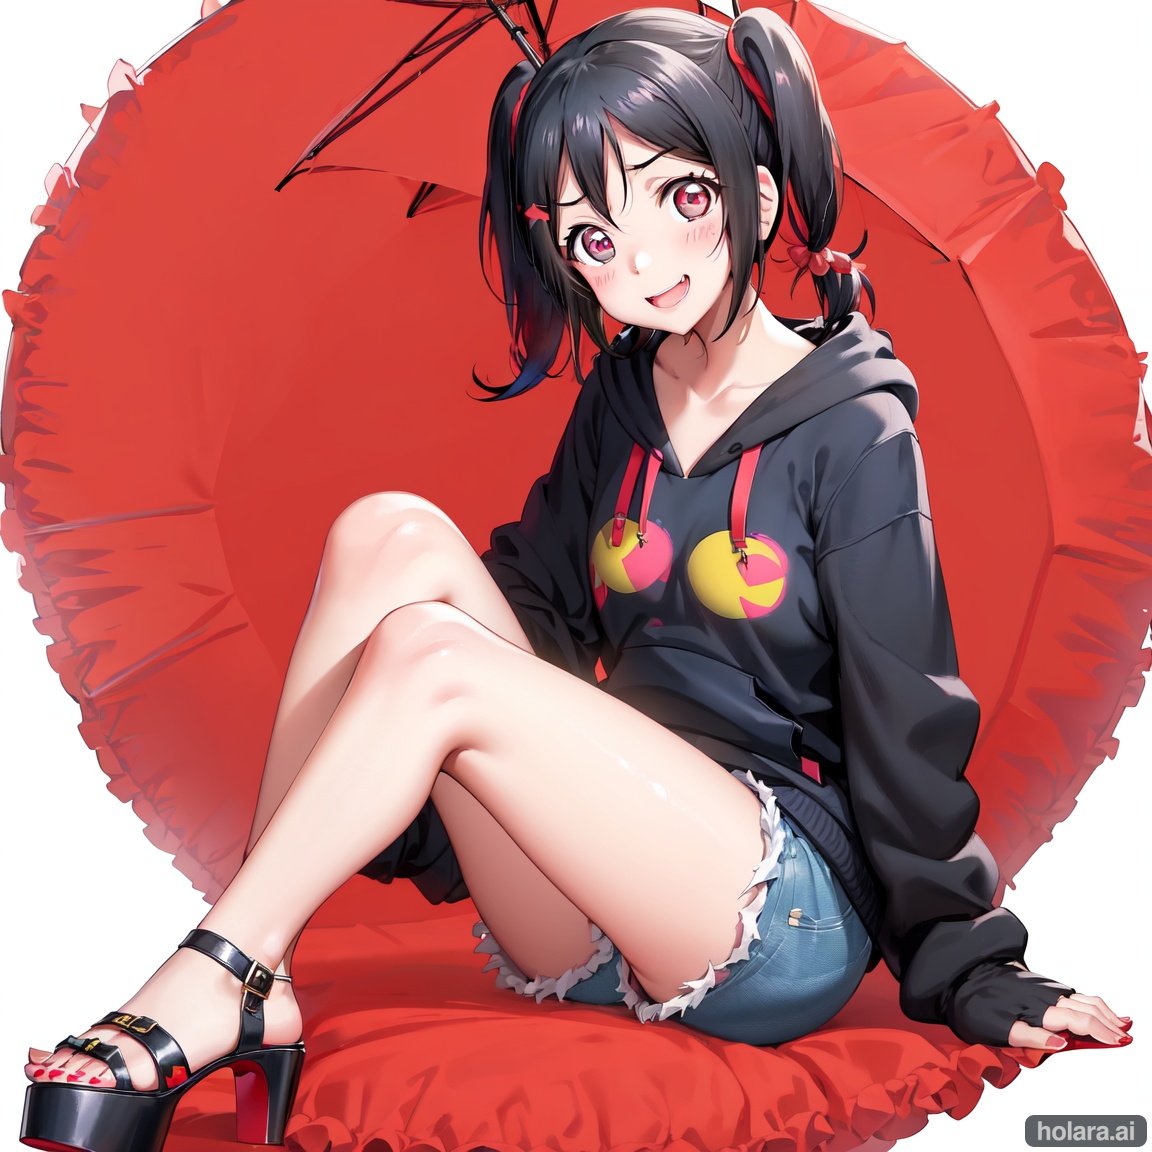 Image of (nico yazawa)+++,(lovelive)+++,1girl,solo,smile,cheerful,(pigtails)+++,(dark blue hoodie)++,(denim shorts)++,(high heel sandals)++,(scarlet colored eyes)+++,(black hair)+++, looking at camera,sitting on bench,umbrella over head,rainy,cloudy